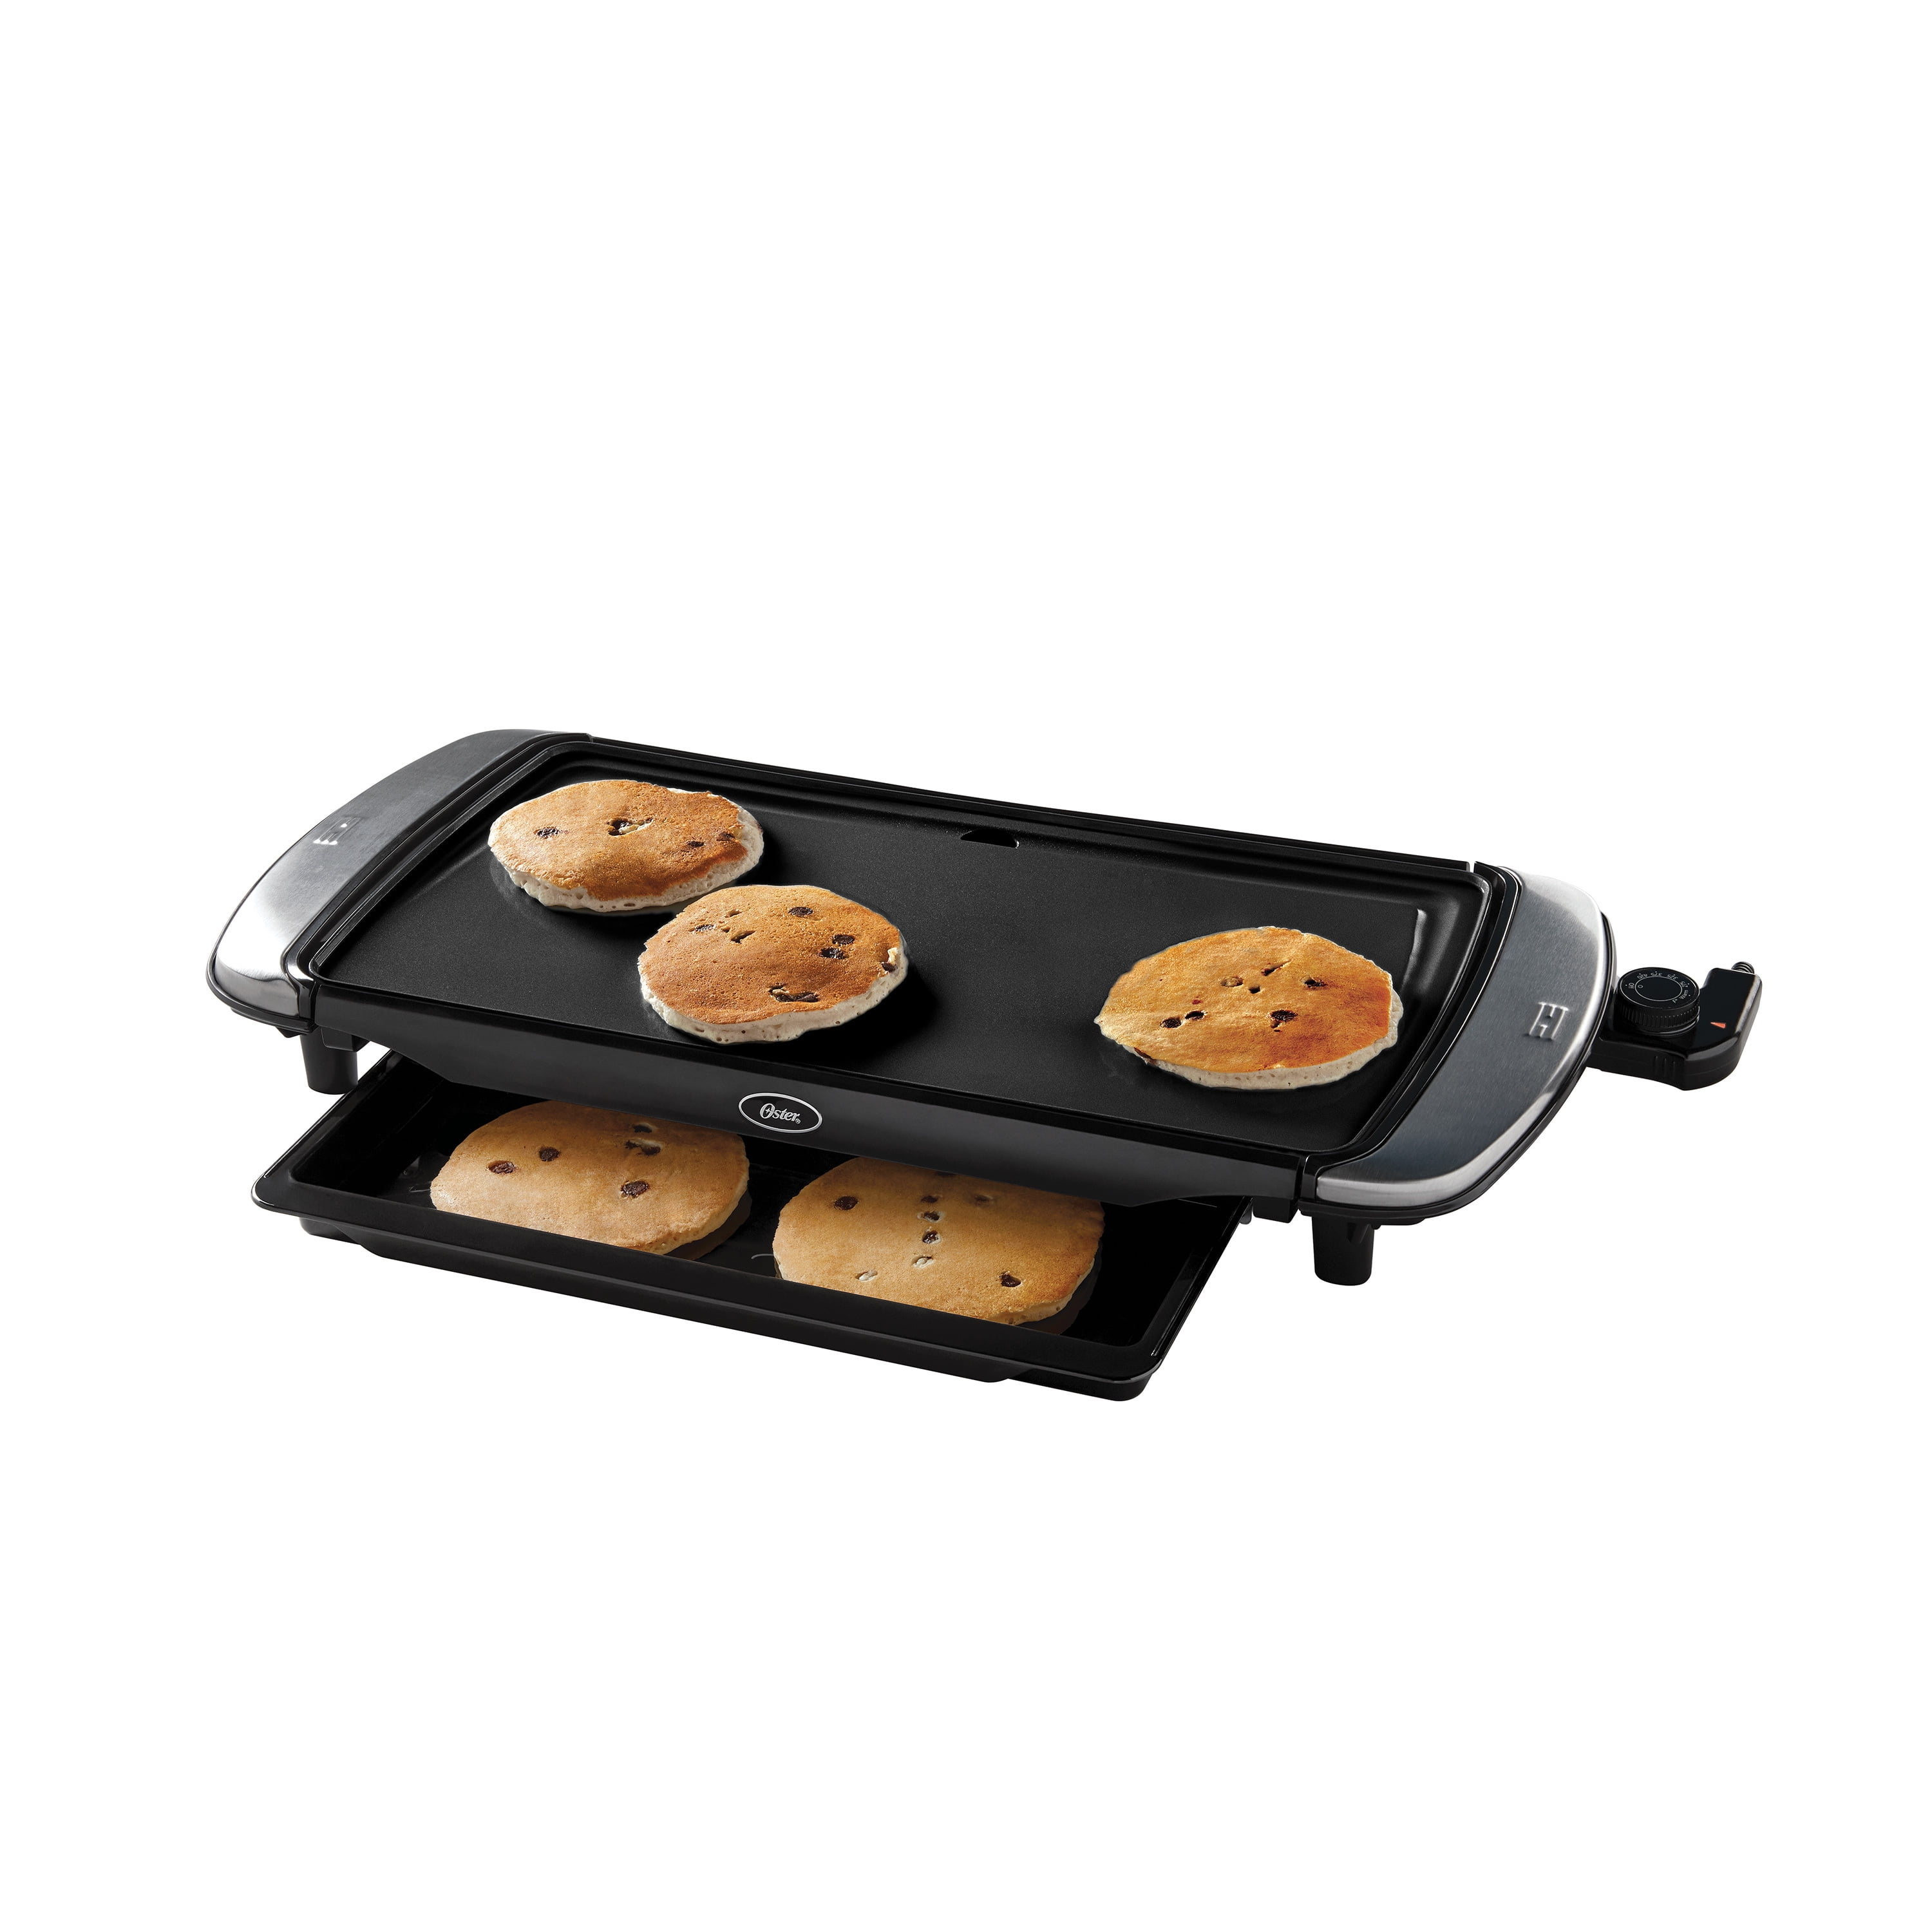  BLACK+DECKER Family Sized Electric Griddle, 20 x 11-Inch